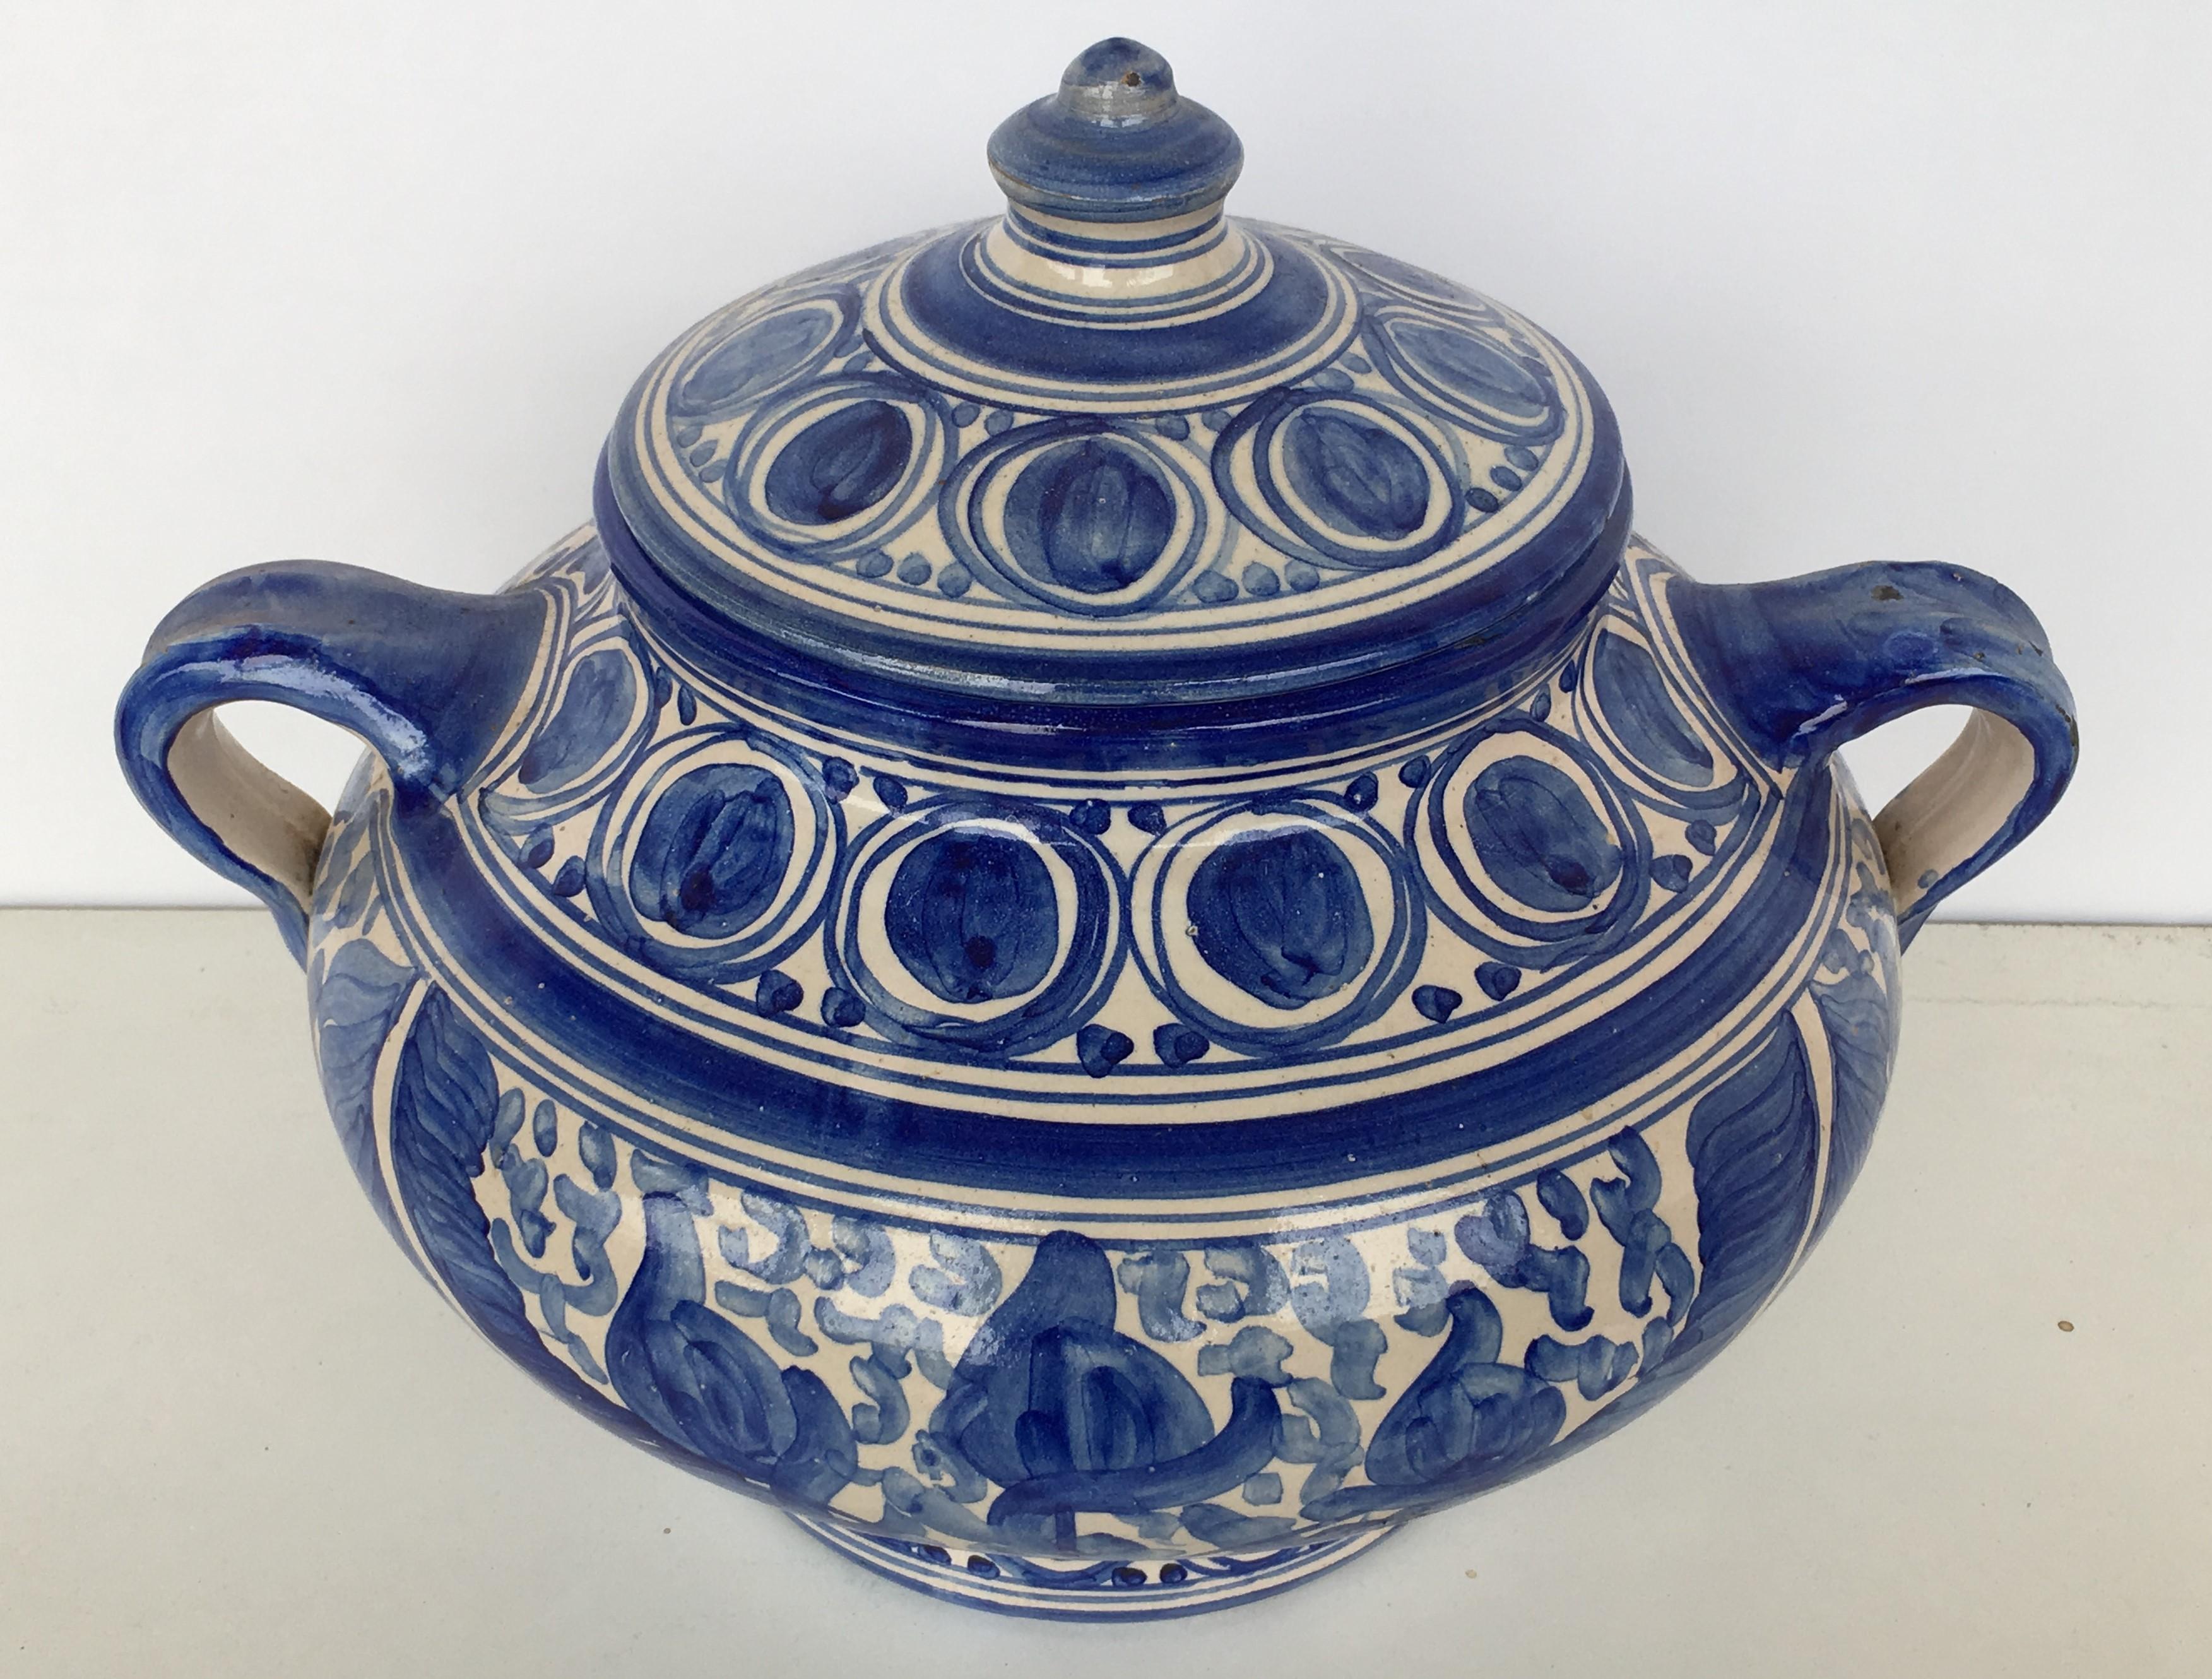 A striking Spanish glazed earthenware blue and white painted urn with cover, the body underglaze blue & white ornamental decorated very tipycal of this region.

Talavera de la Reina pottery is a craft made in Talavera de la Reina, Toledo (Spain).